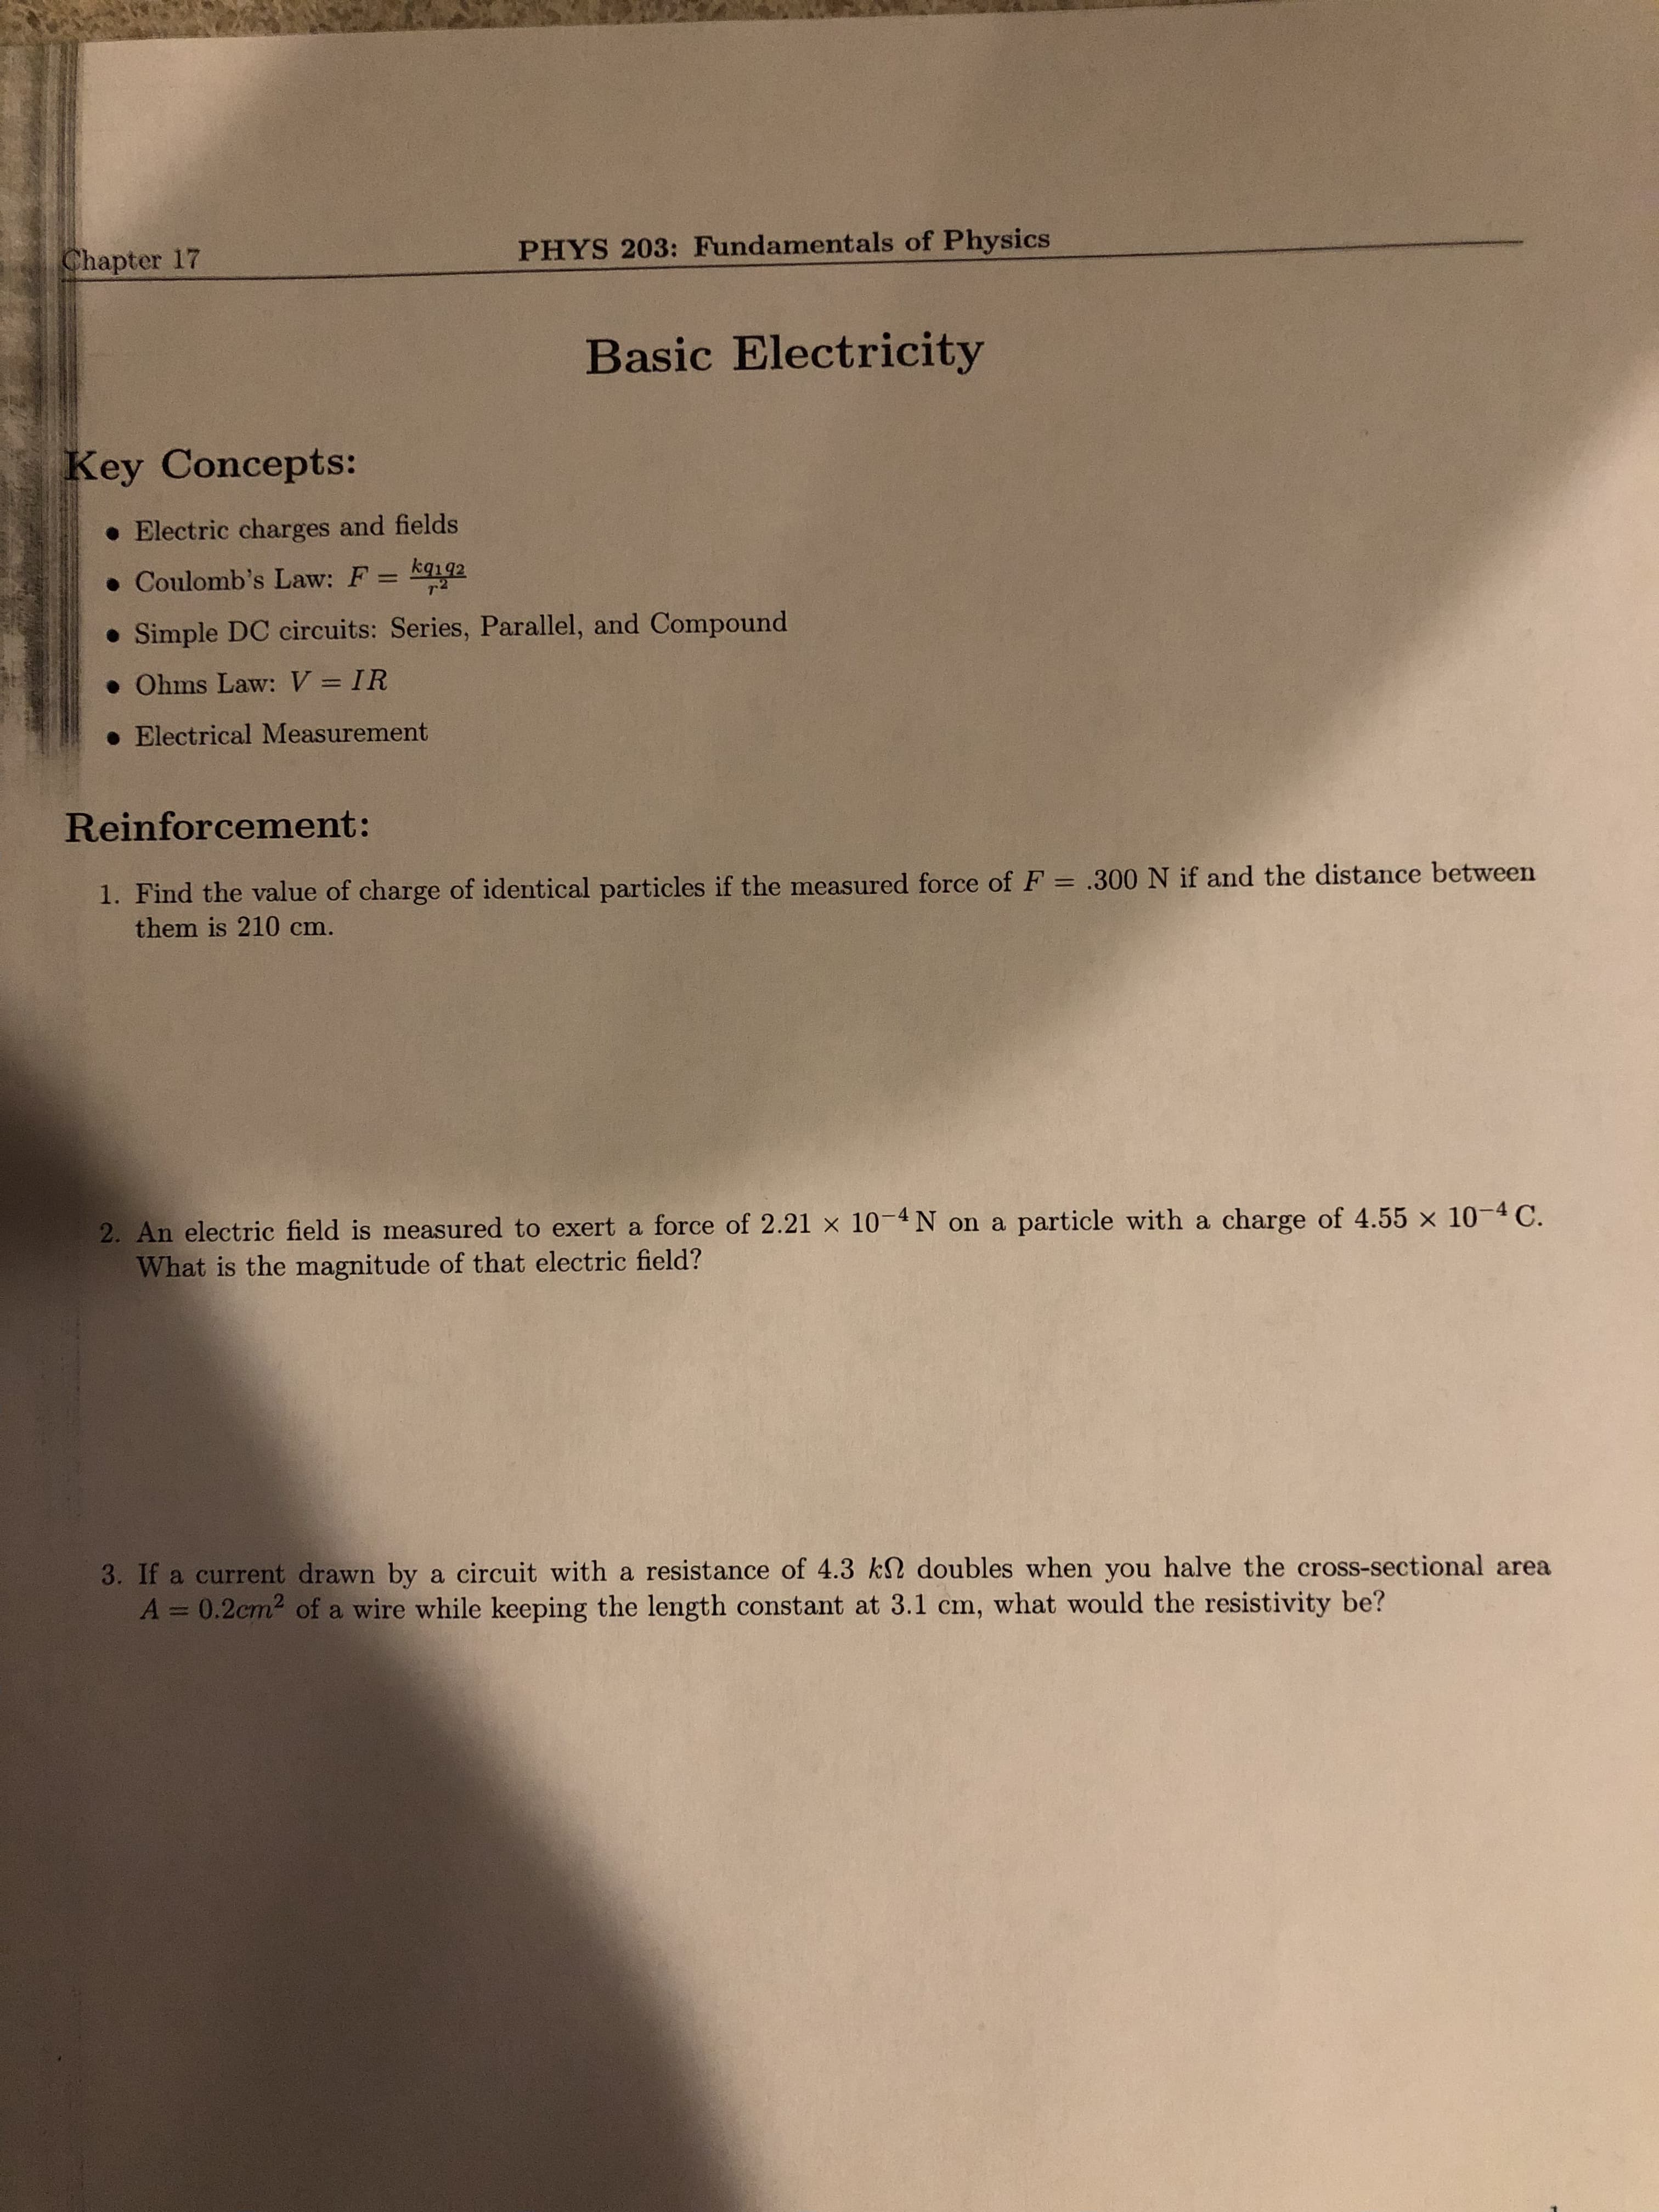 Chapter 17
PHYS 203: Fundamentals of Physics
Basic Electricity
Key Concepts:
. Electric charges and fields
• Coulomb's Law: F = kq192
%3D
• Simple DC circuits: Series, Parallel, and Compound
• Ohms Law: V = IR
%3D
• Electrical Measurement
Reinforcement:
1. Find the value of charge of identical particles if the measured force of F = .300 N if and the distance between
them is 210 cm.
2. An electric field is measured to exert a force of 2.21 × 10-4N on a particle with a charge of 4.55 x 10-4 C.
What is the magnitude of that electric field?
3. If a current drawn by a circuit with a resistance of 4.3 k2 doubles when you halve the cross-sectional area
A = 0.2cm2 of a wire while keeping the length constant at 3.1 cm, what would the resistivity be?
%3D
